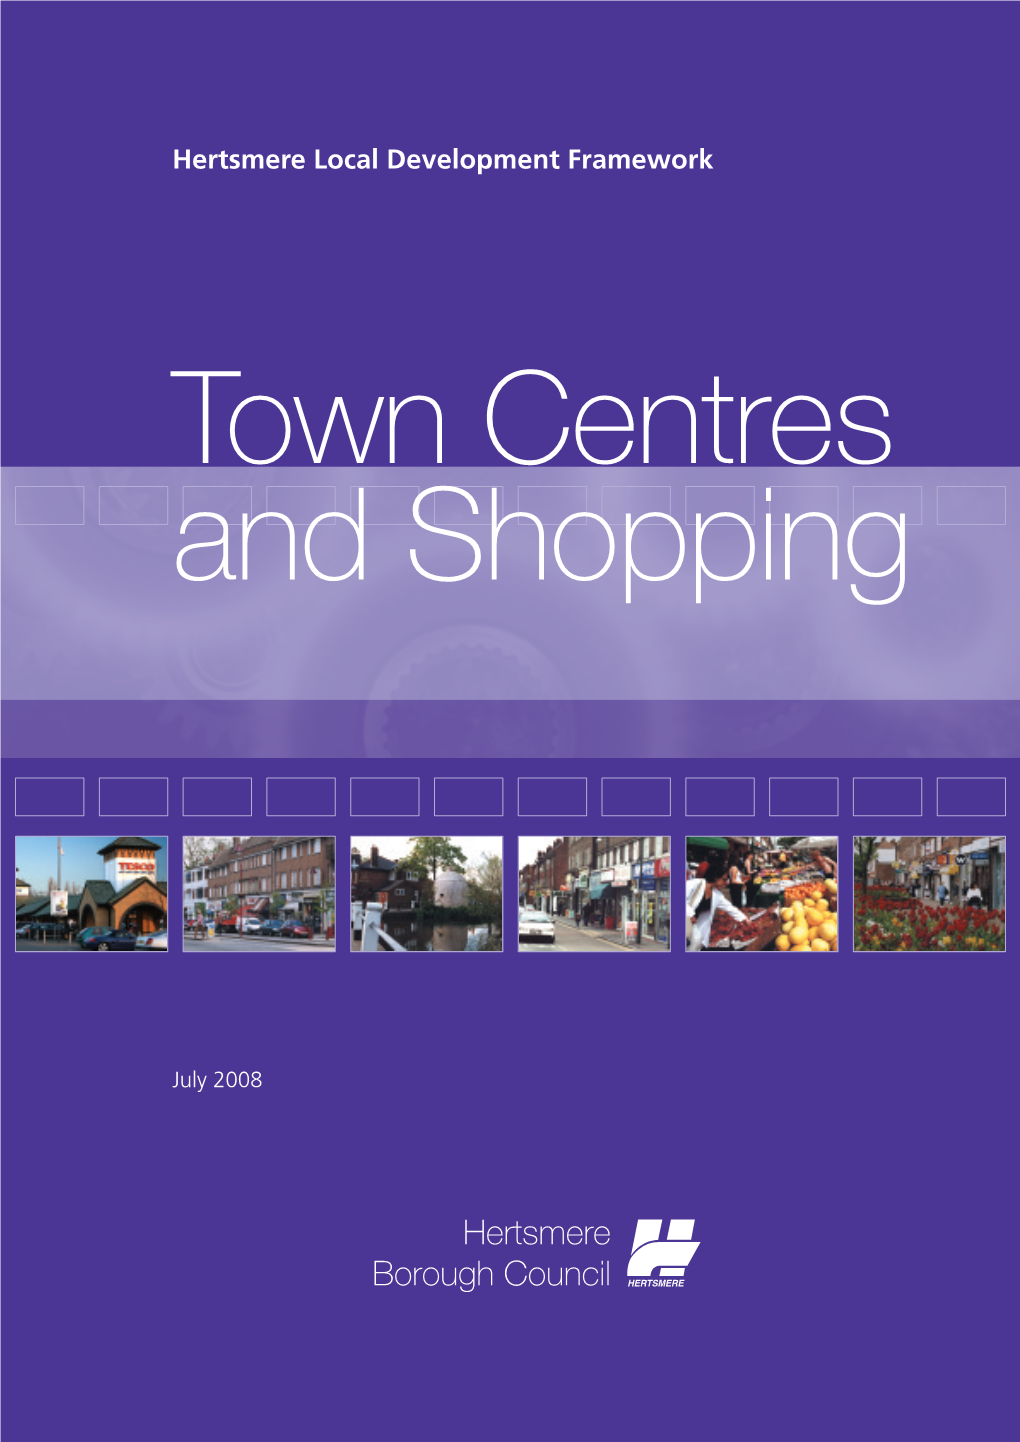 Town Centres and Shopping Study July 2008